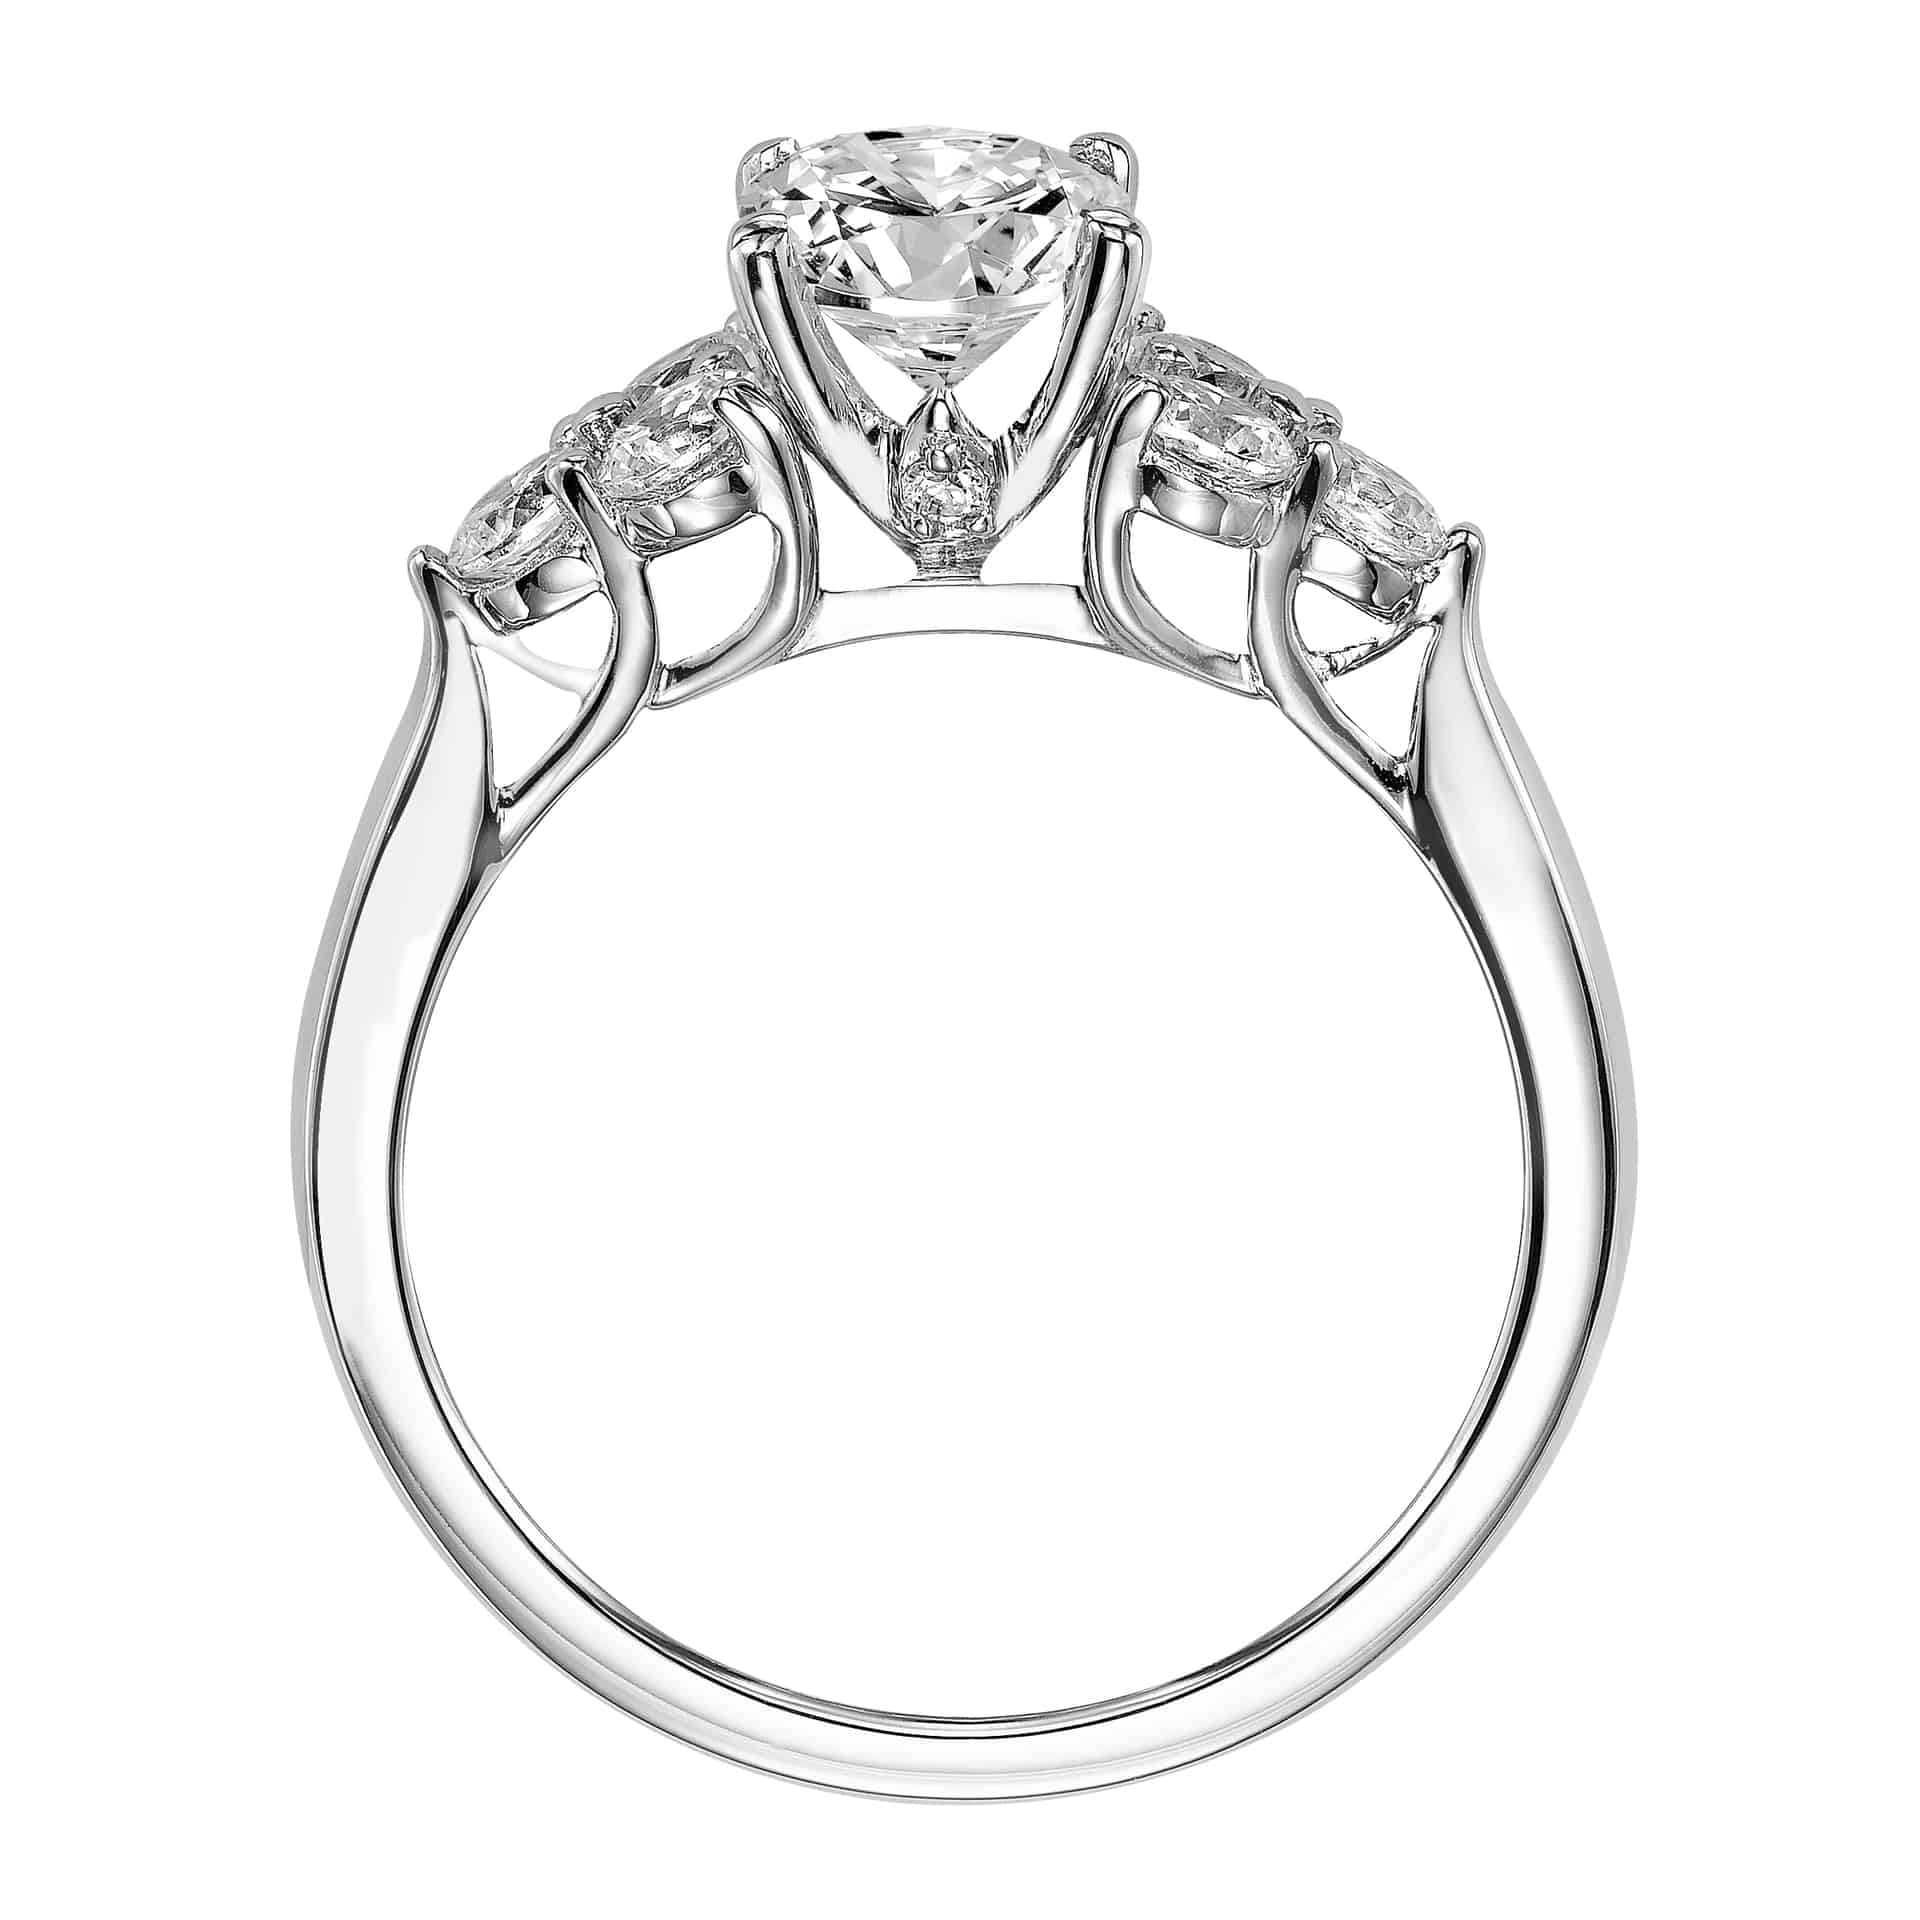 High Setting vs Low Setting Engagement Rings | Jewelry Guide